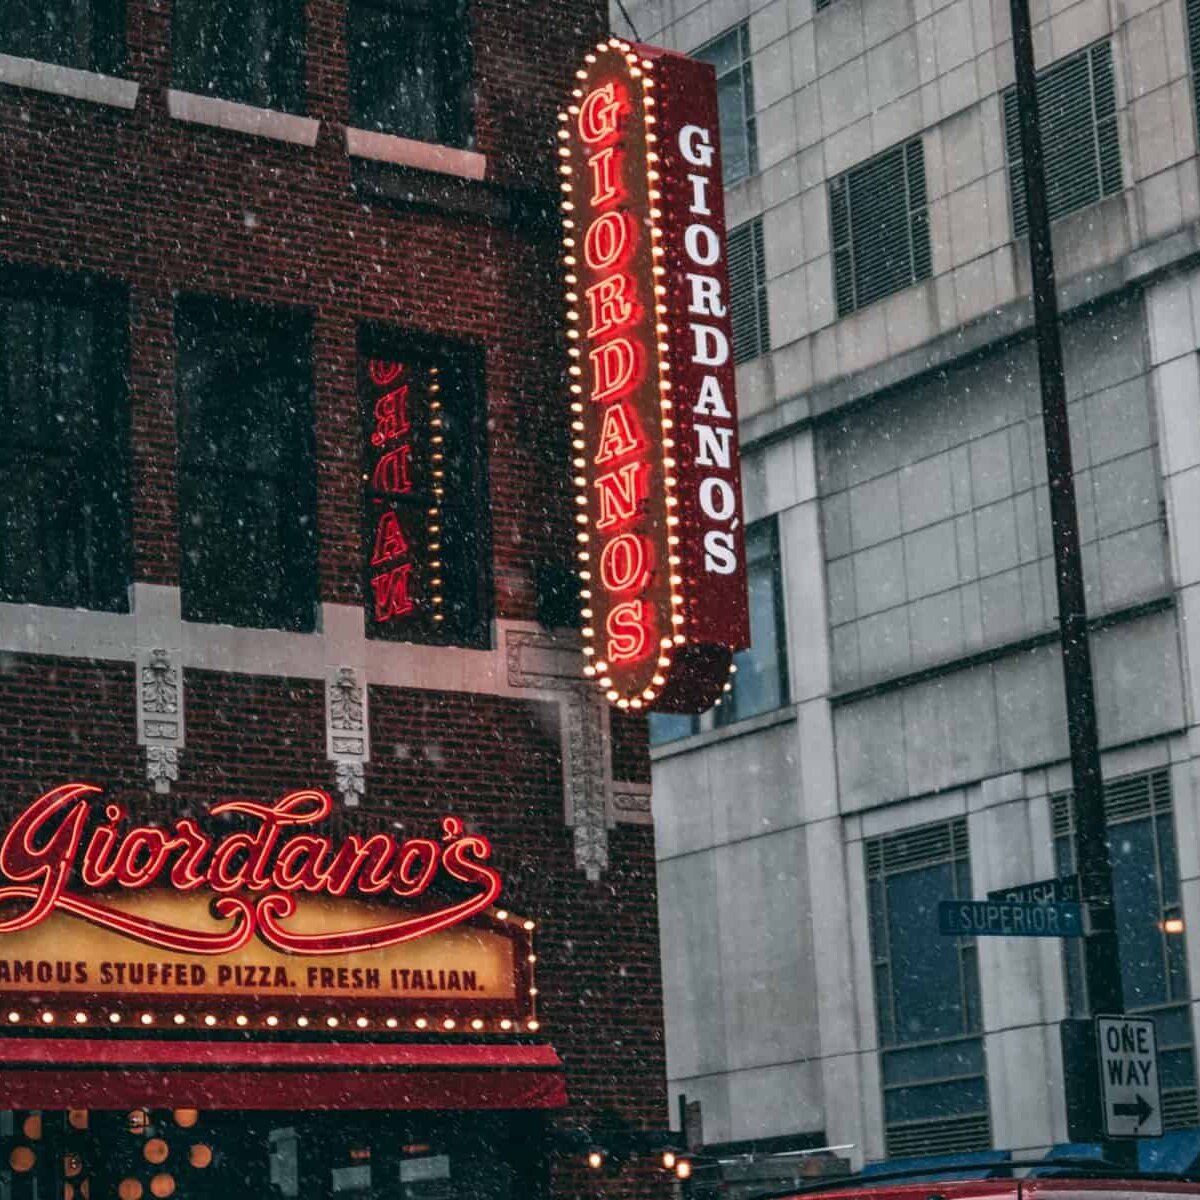 The exterior sign for Giordano's Pizza Place.